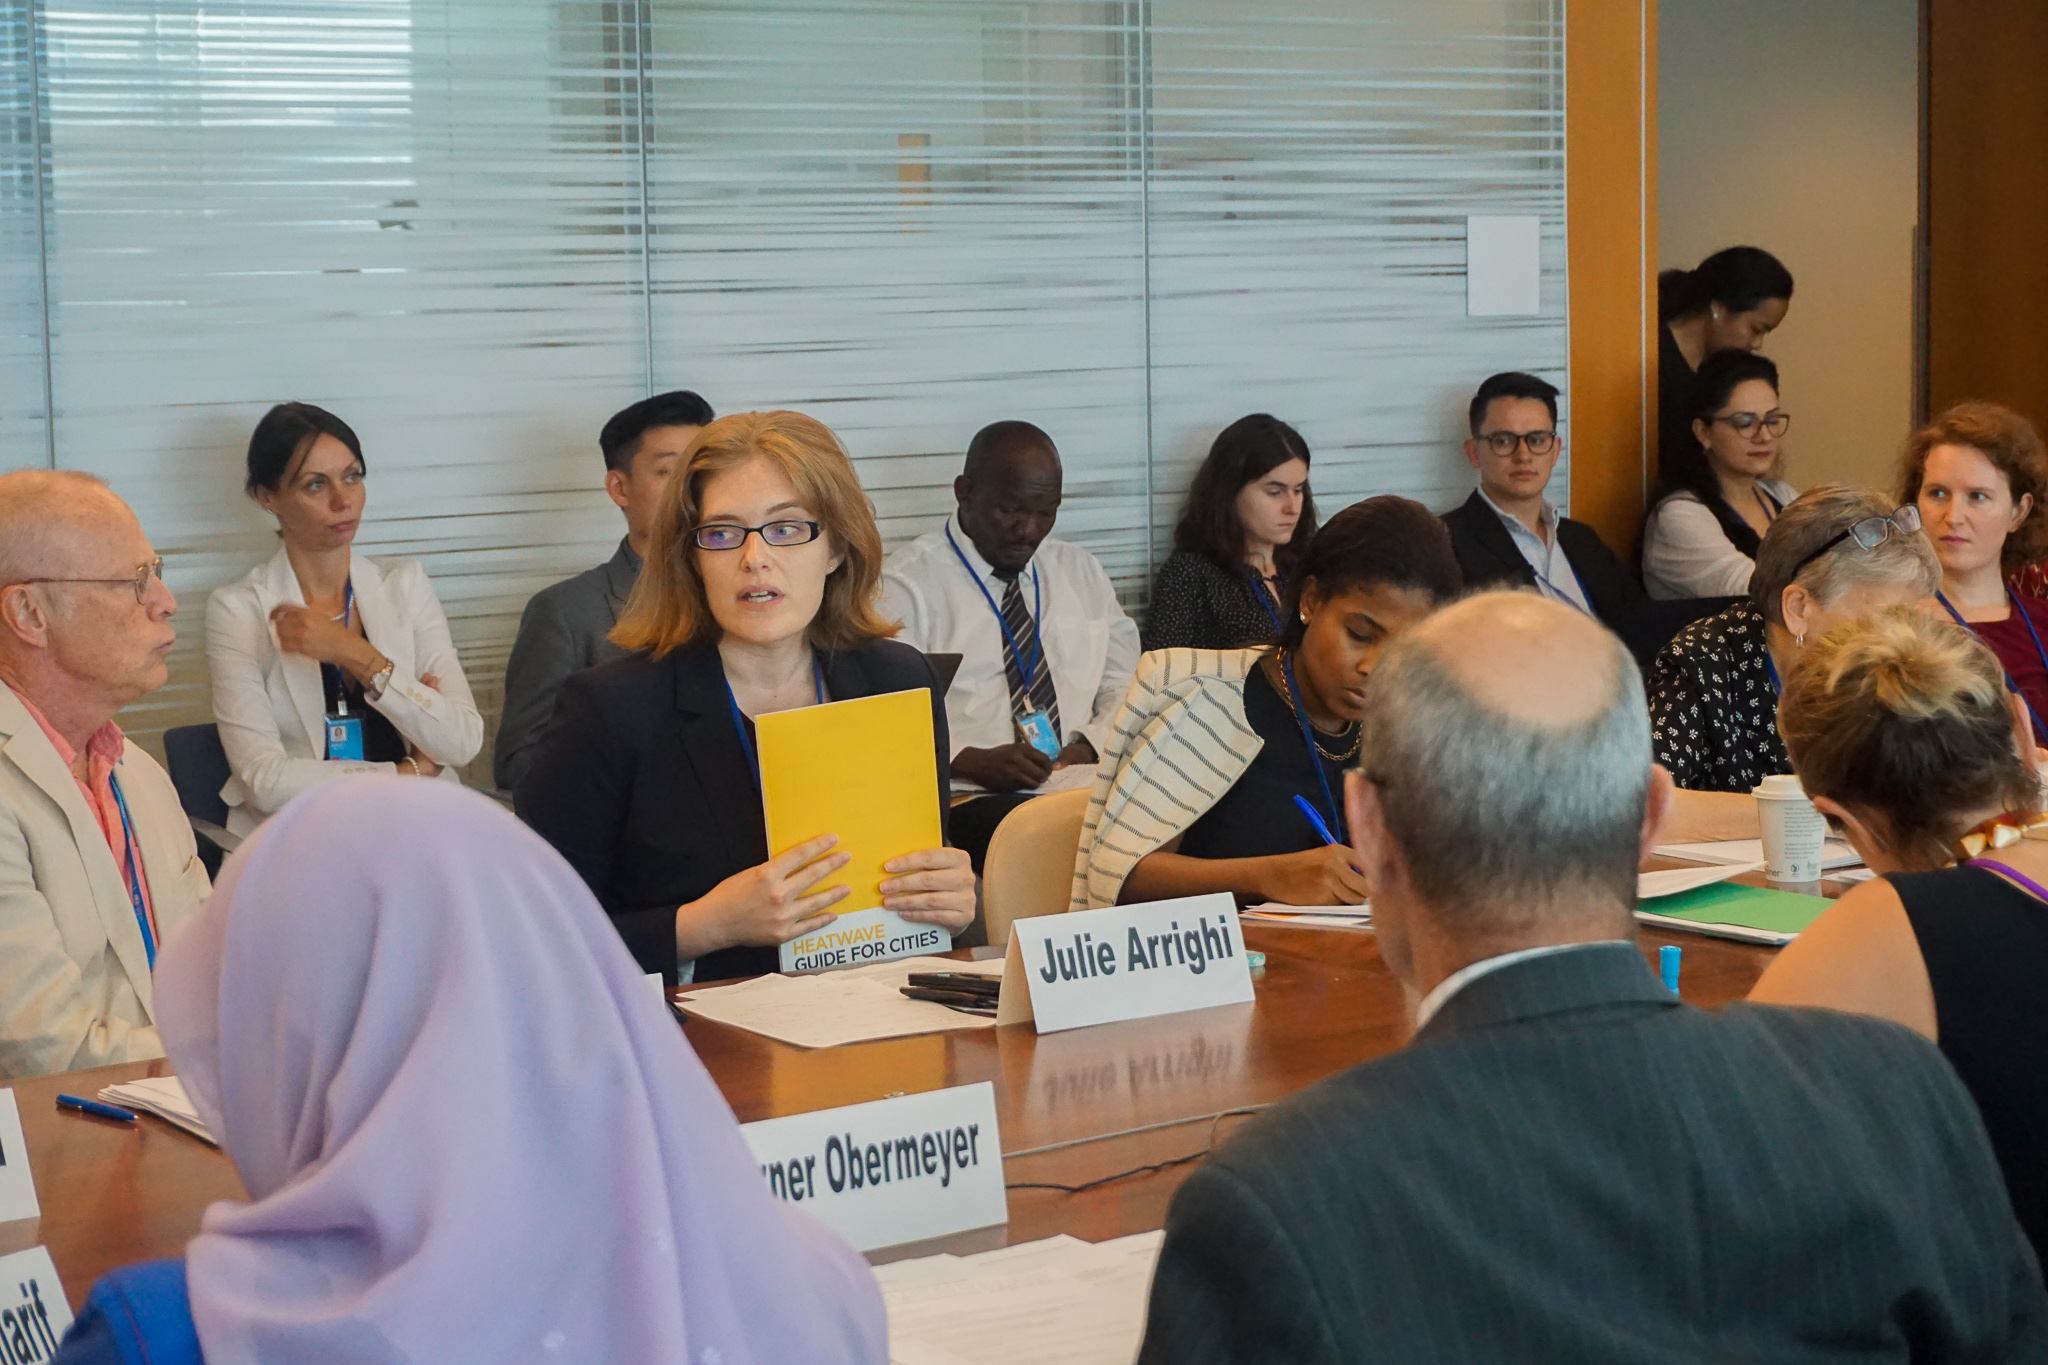 HLPF - Ms. Julie Arrighi, Red Cross Red Crescent Climate Expert, introduces the  Heatwave Guide for Cities during the Heatwaves Side Event, July 17th, 2019, New York